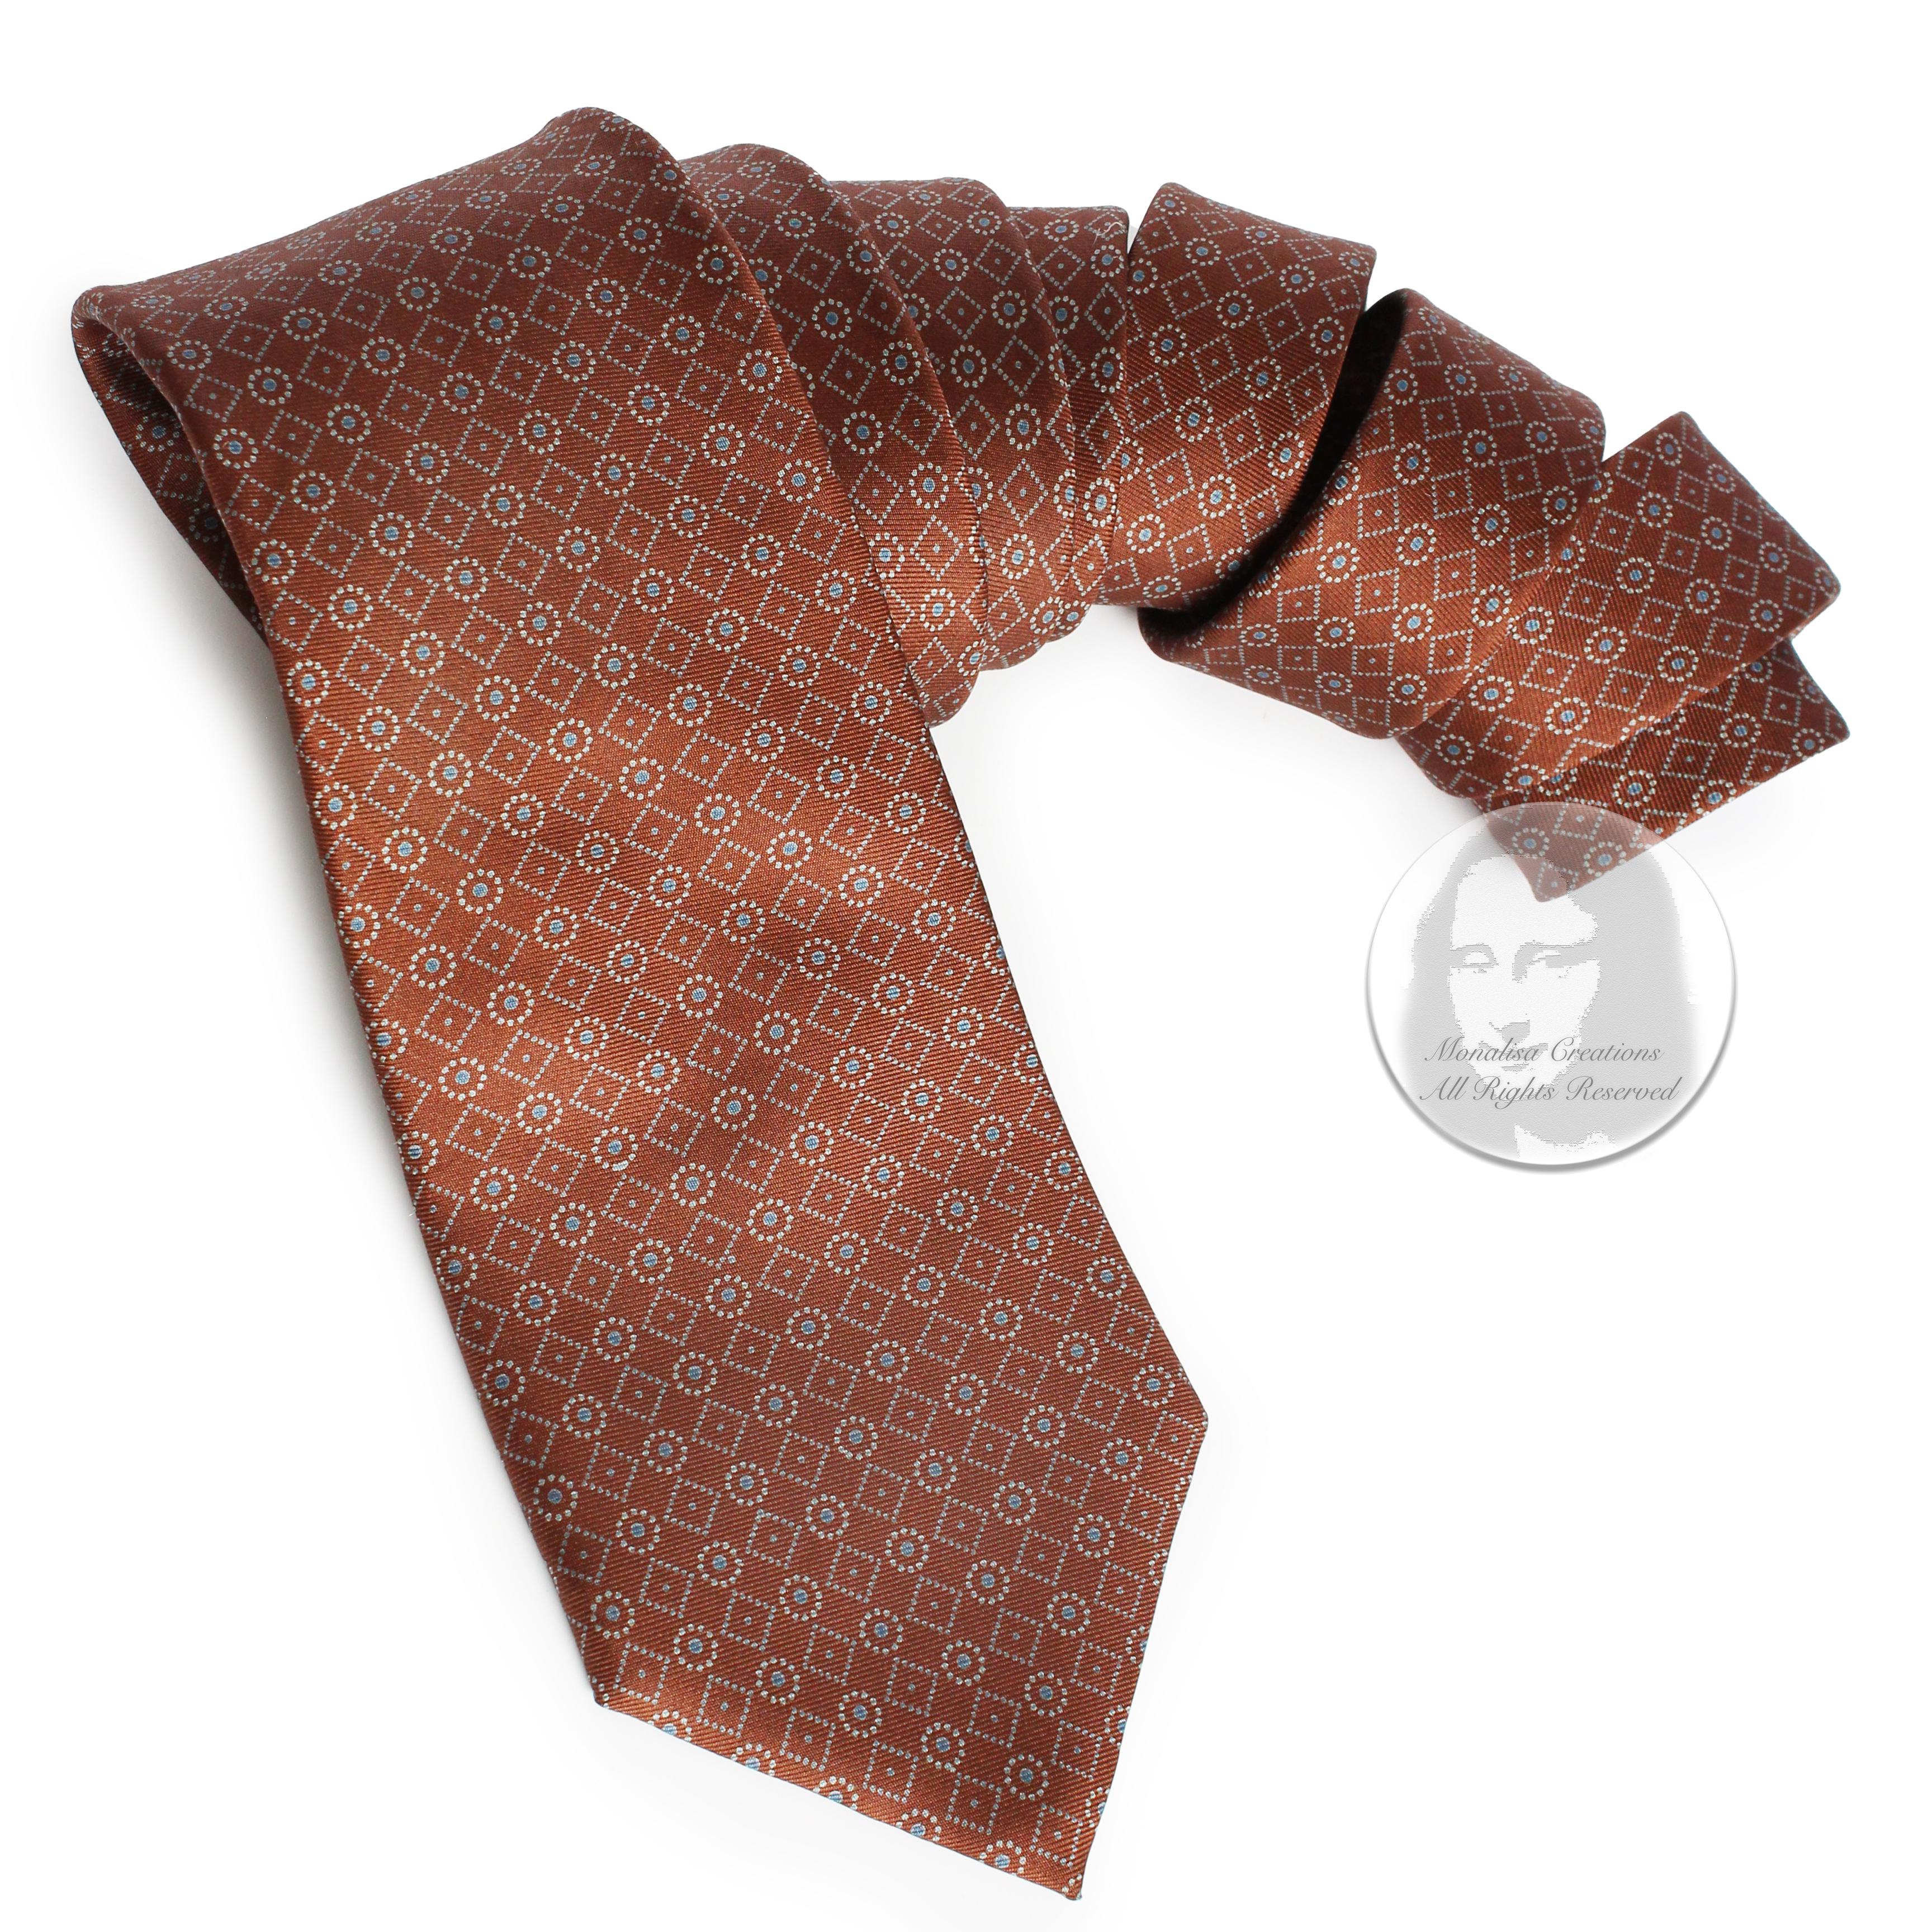 Authentic, preowned, vintage Yves Saint Laurent necktie, most likely made in the 1970s. Made from silk, it features a Moroccan influenced abstract pattern of dotted circles and diamond shapes in pale blue against a red-hued brown background.  

It's